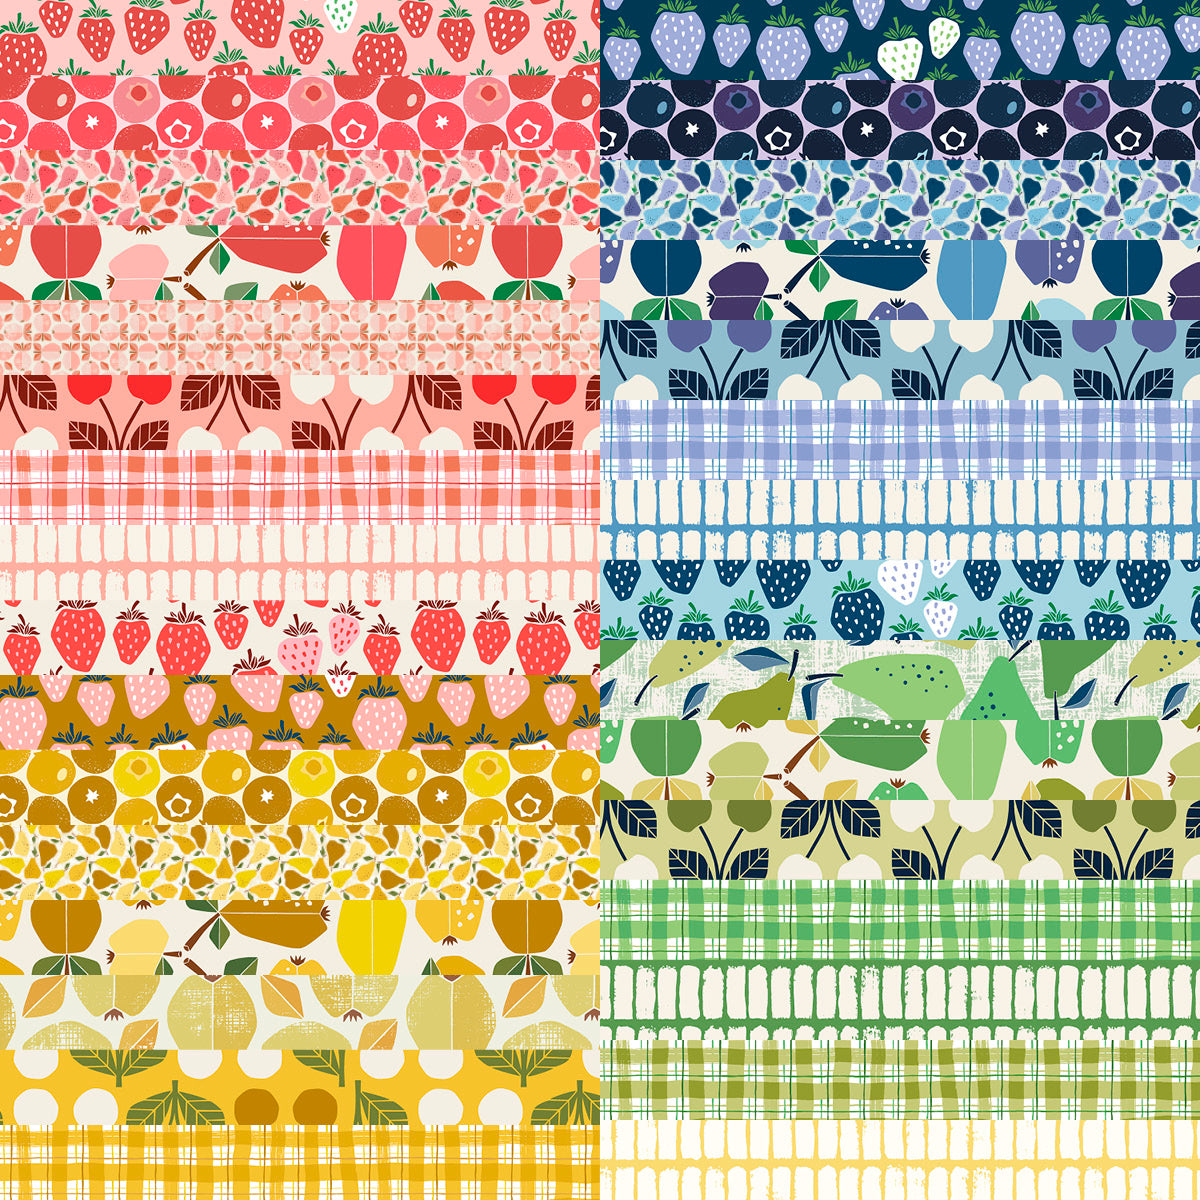 Under the Apple Tree - Picnic Meadow Fabric